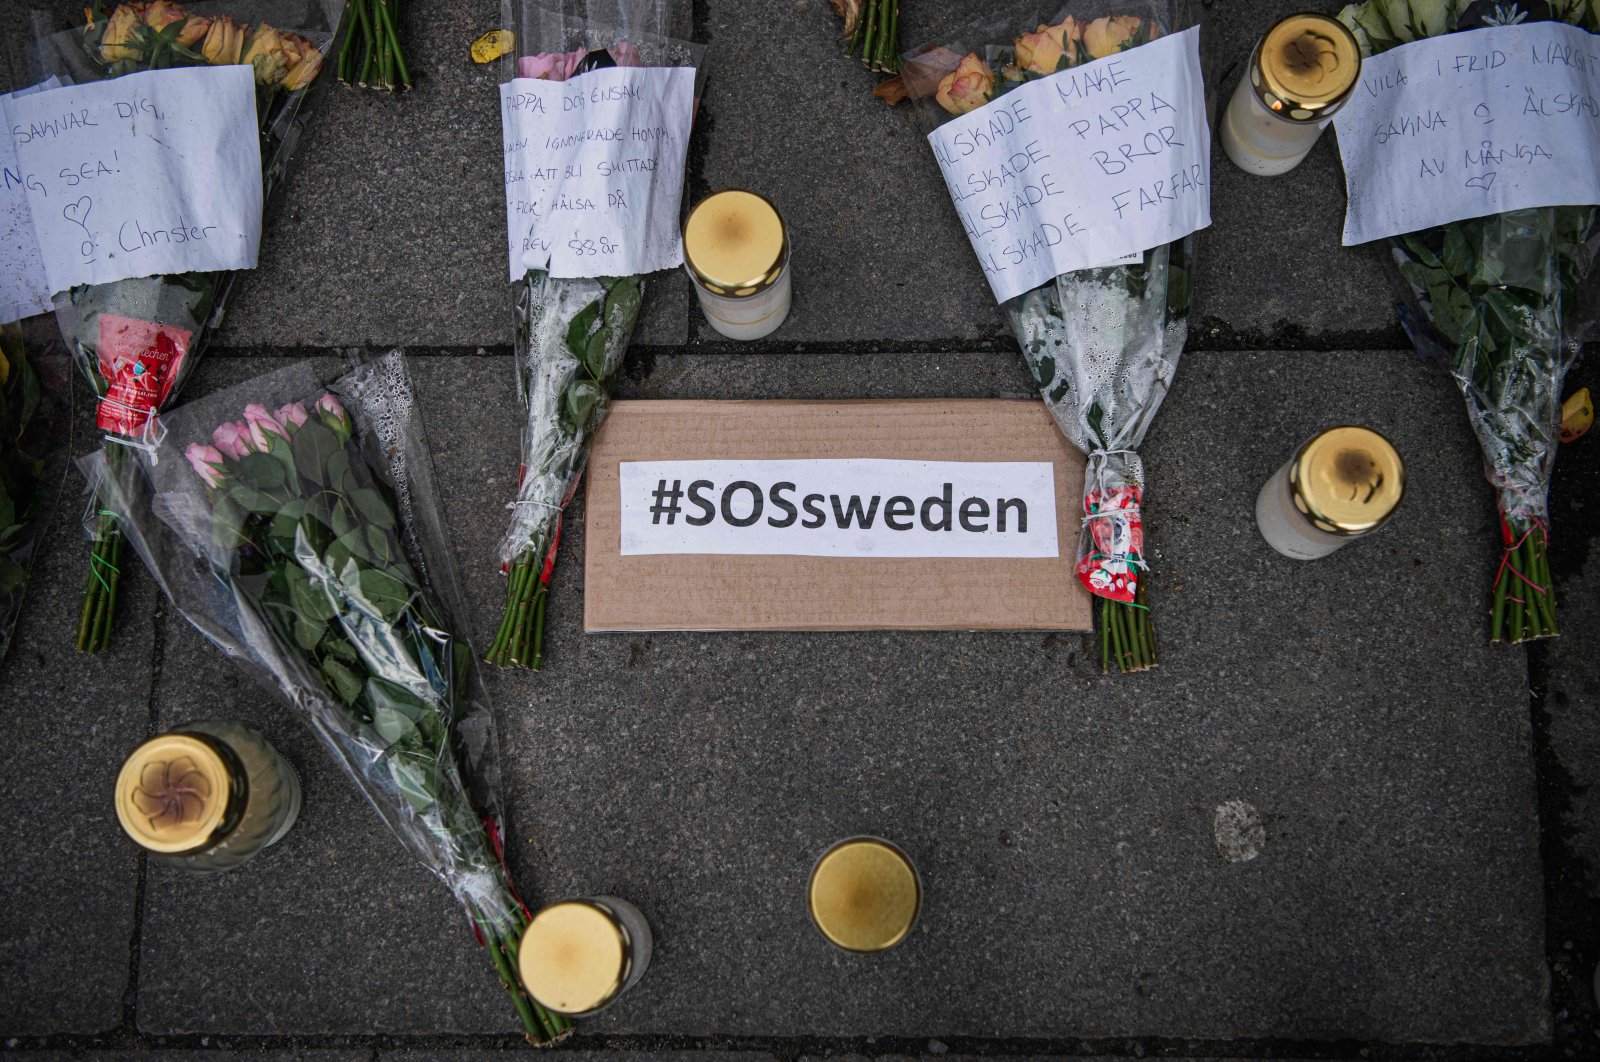 Picture taken on April 29, 2020 showing a memorial in Stockholm's Mynttorget Square to those lost to the new coronavirus. Many have voiced frustration over Sweden's softer approach to curbing the illness. (AFP Photo)